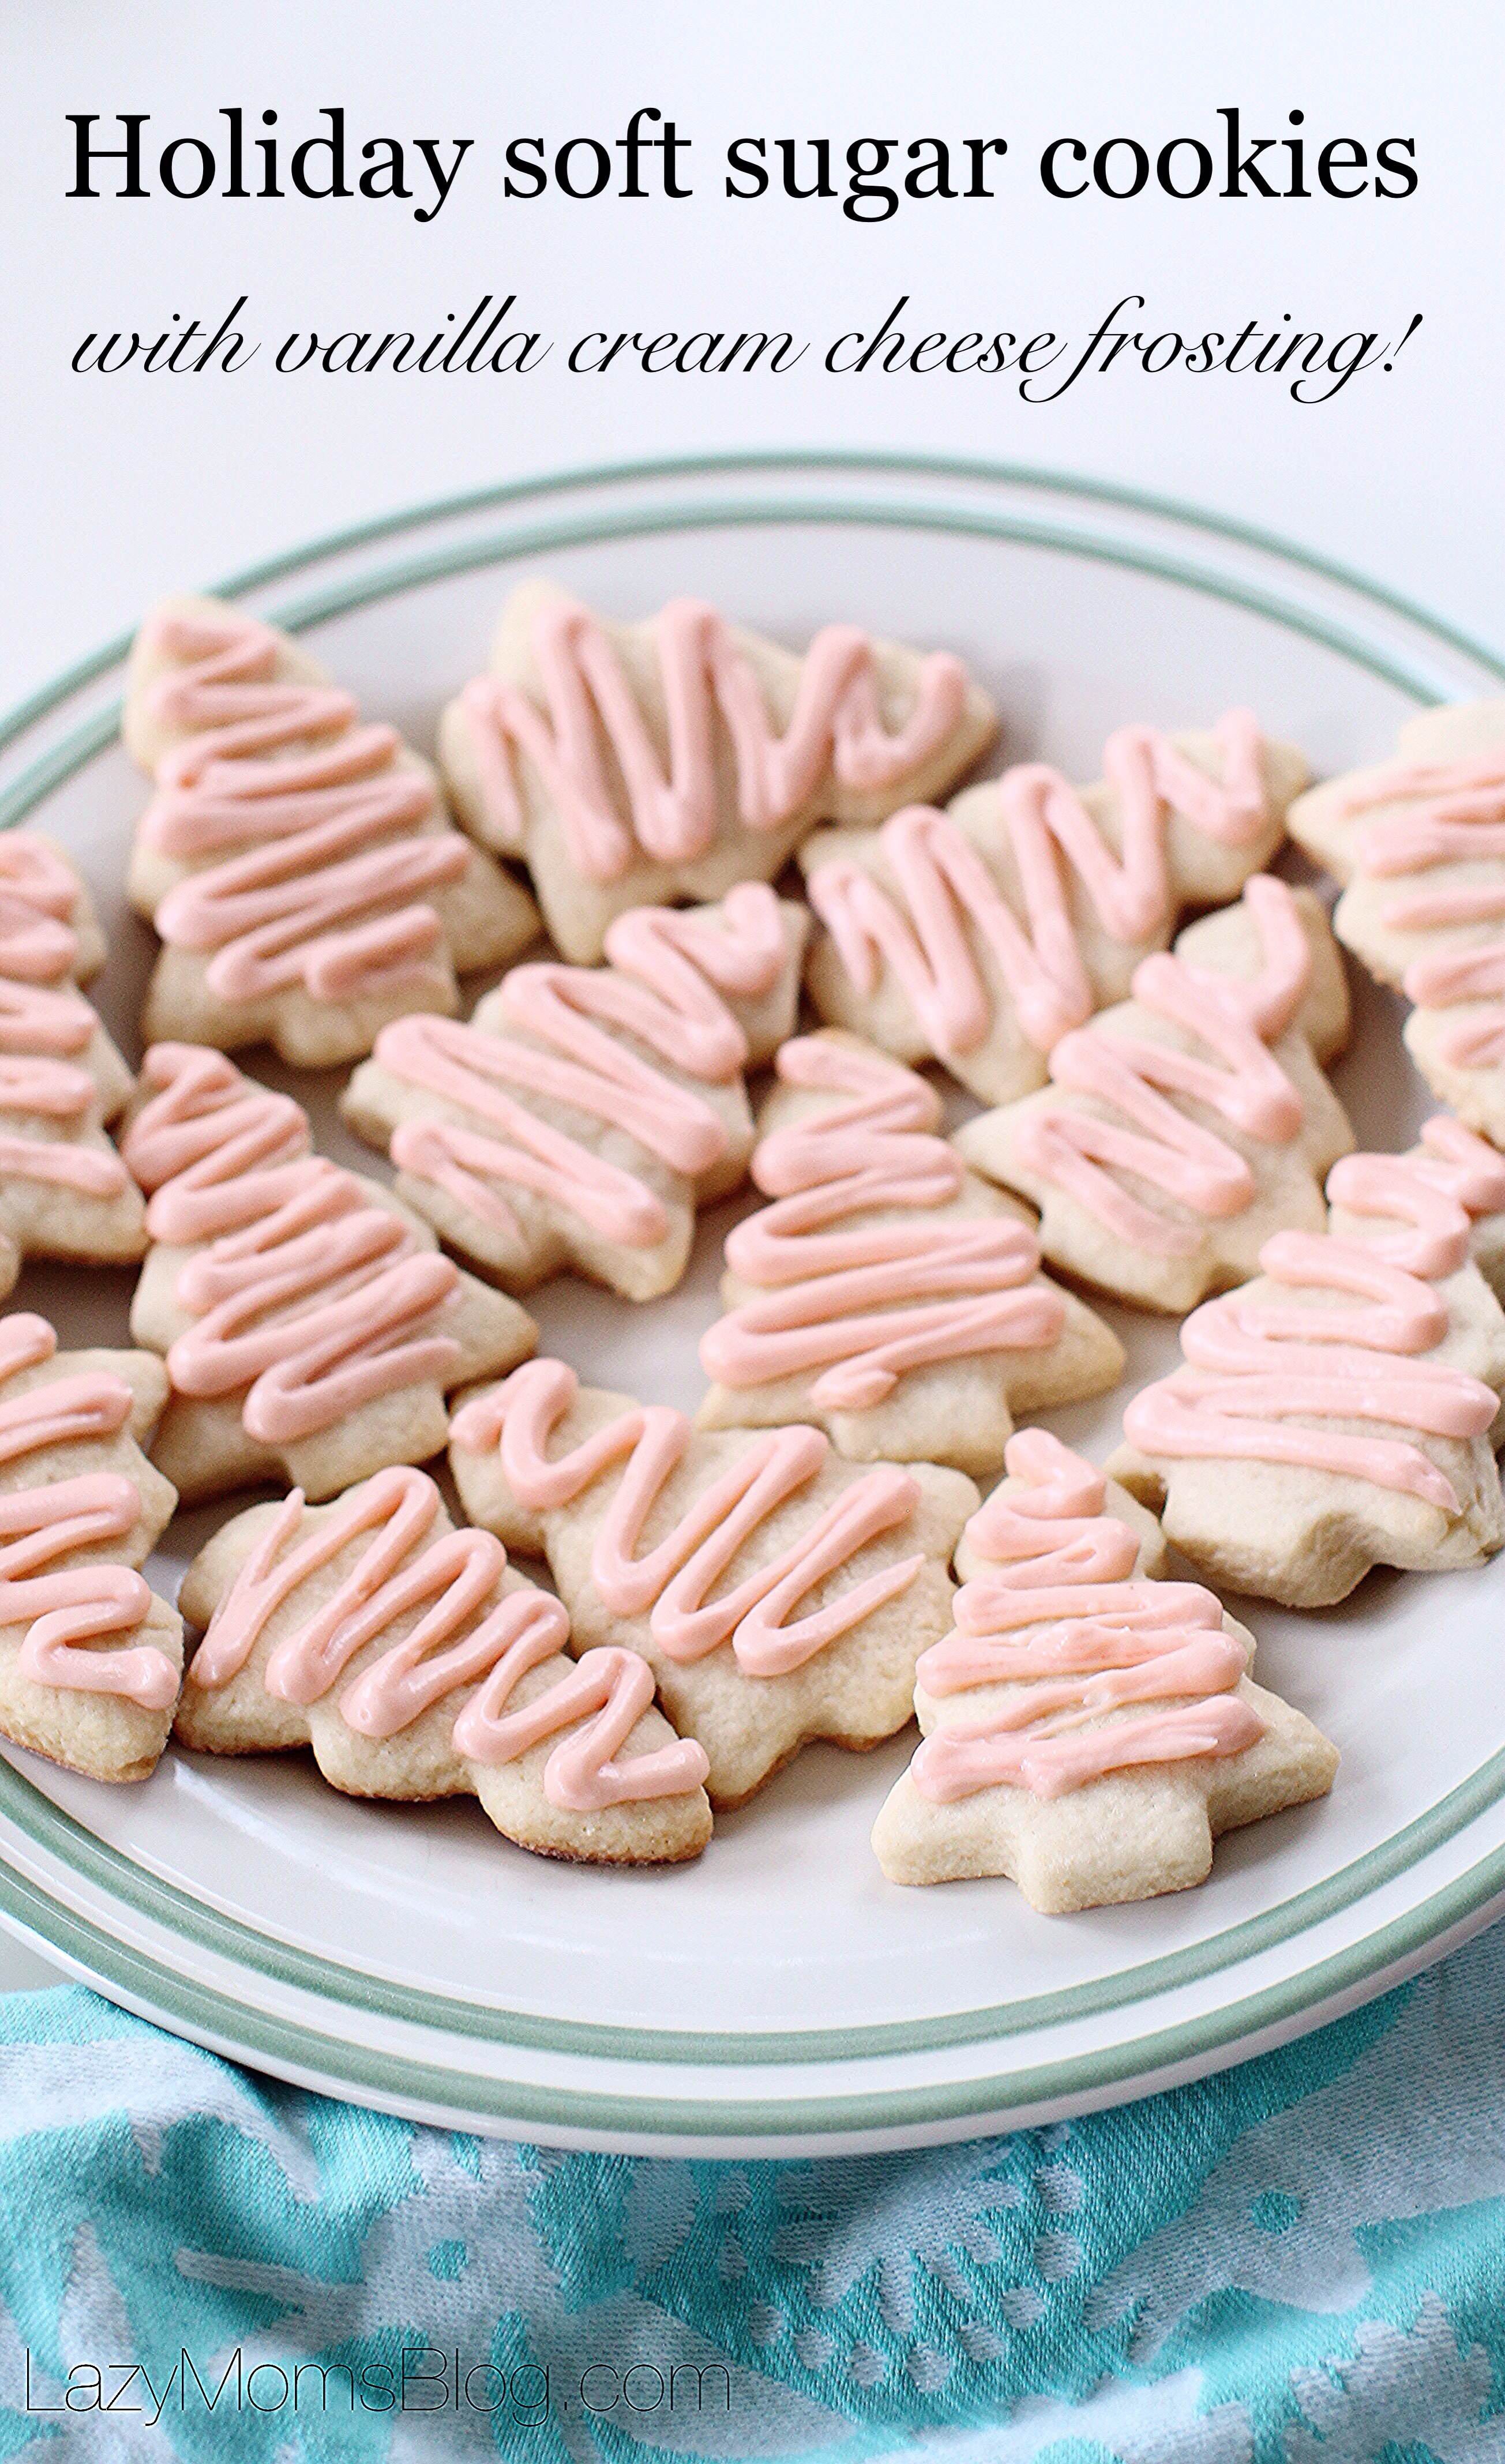 Easy and puffy soft sugar cookies recipe , so delicious and uncomplicated!  And once frosted with this vanilla cream cheese frosting, they simply melt  in your mouth!  